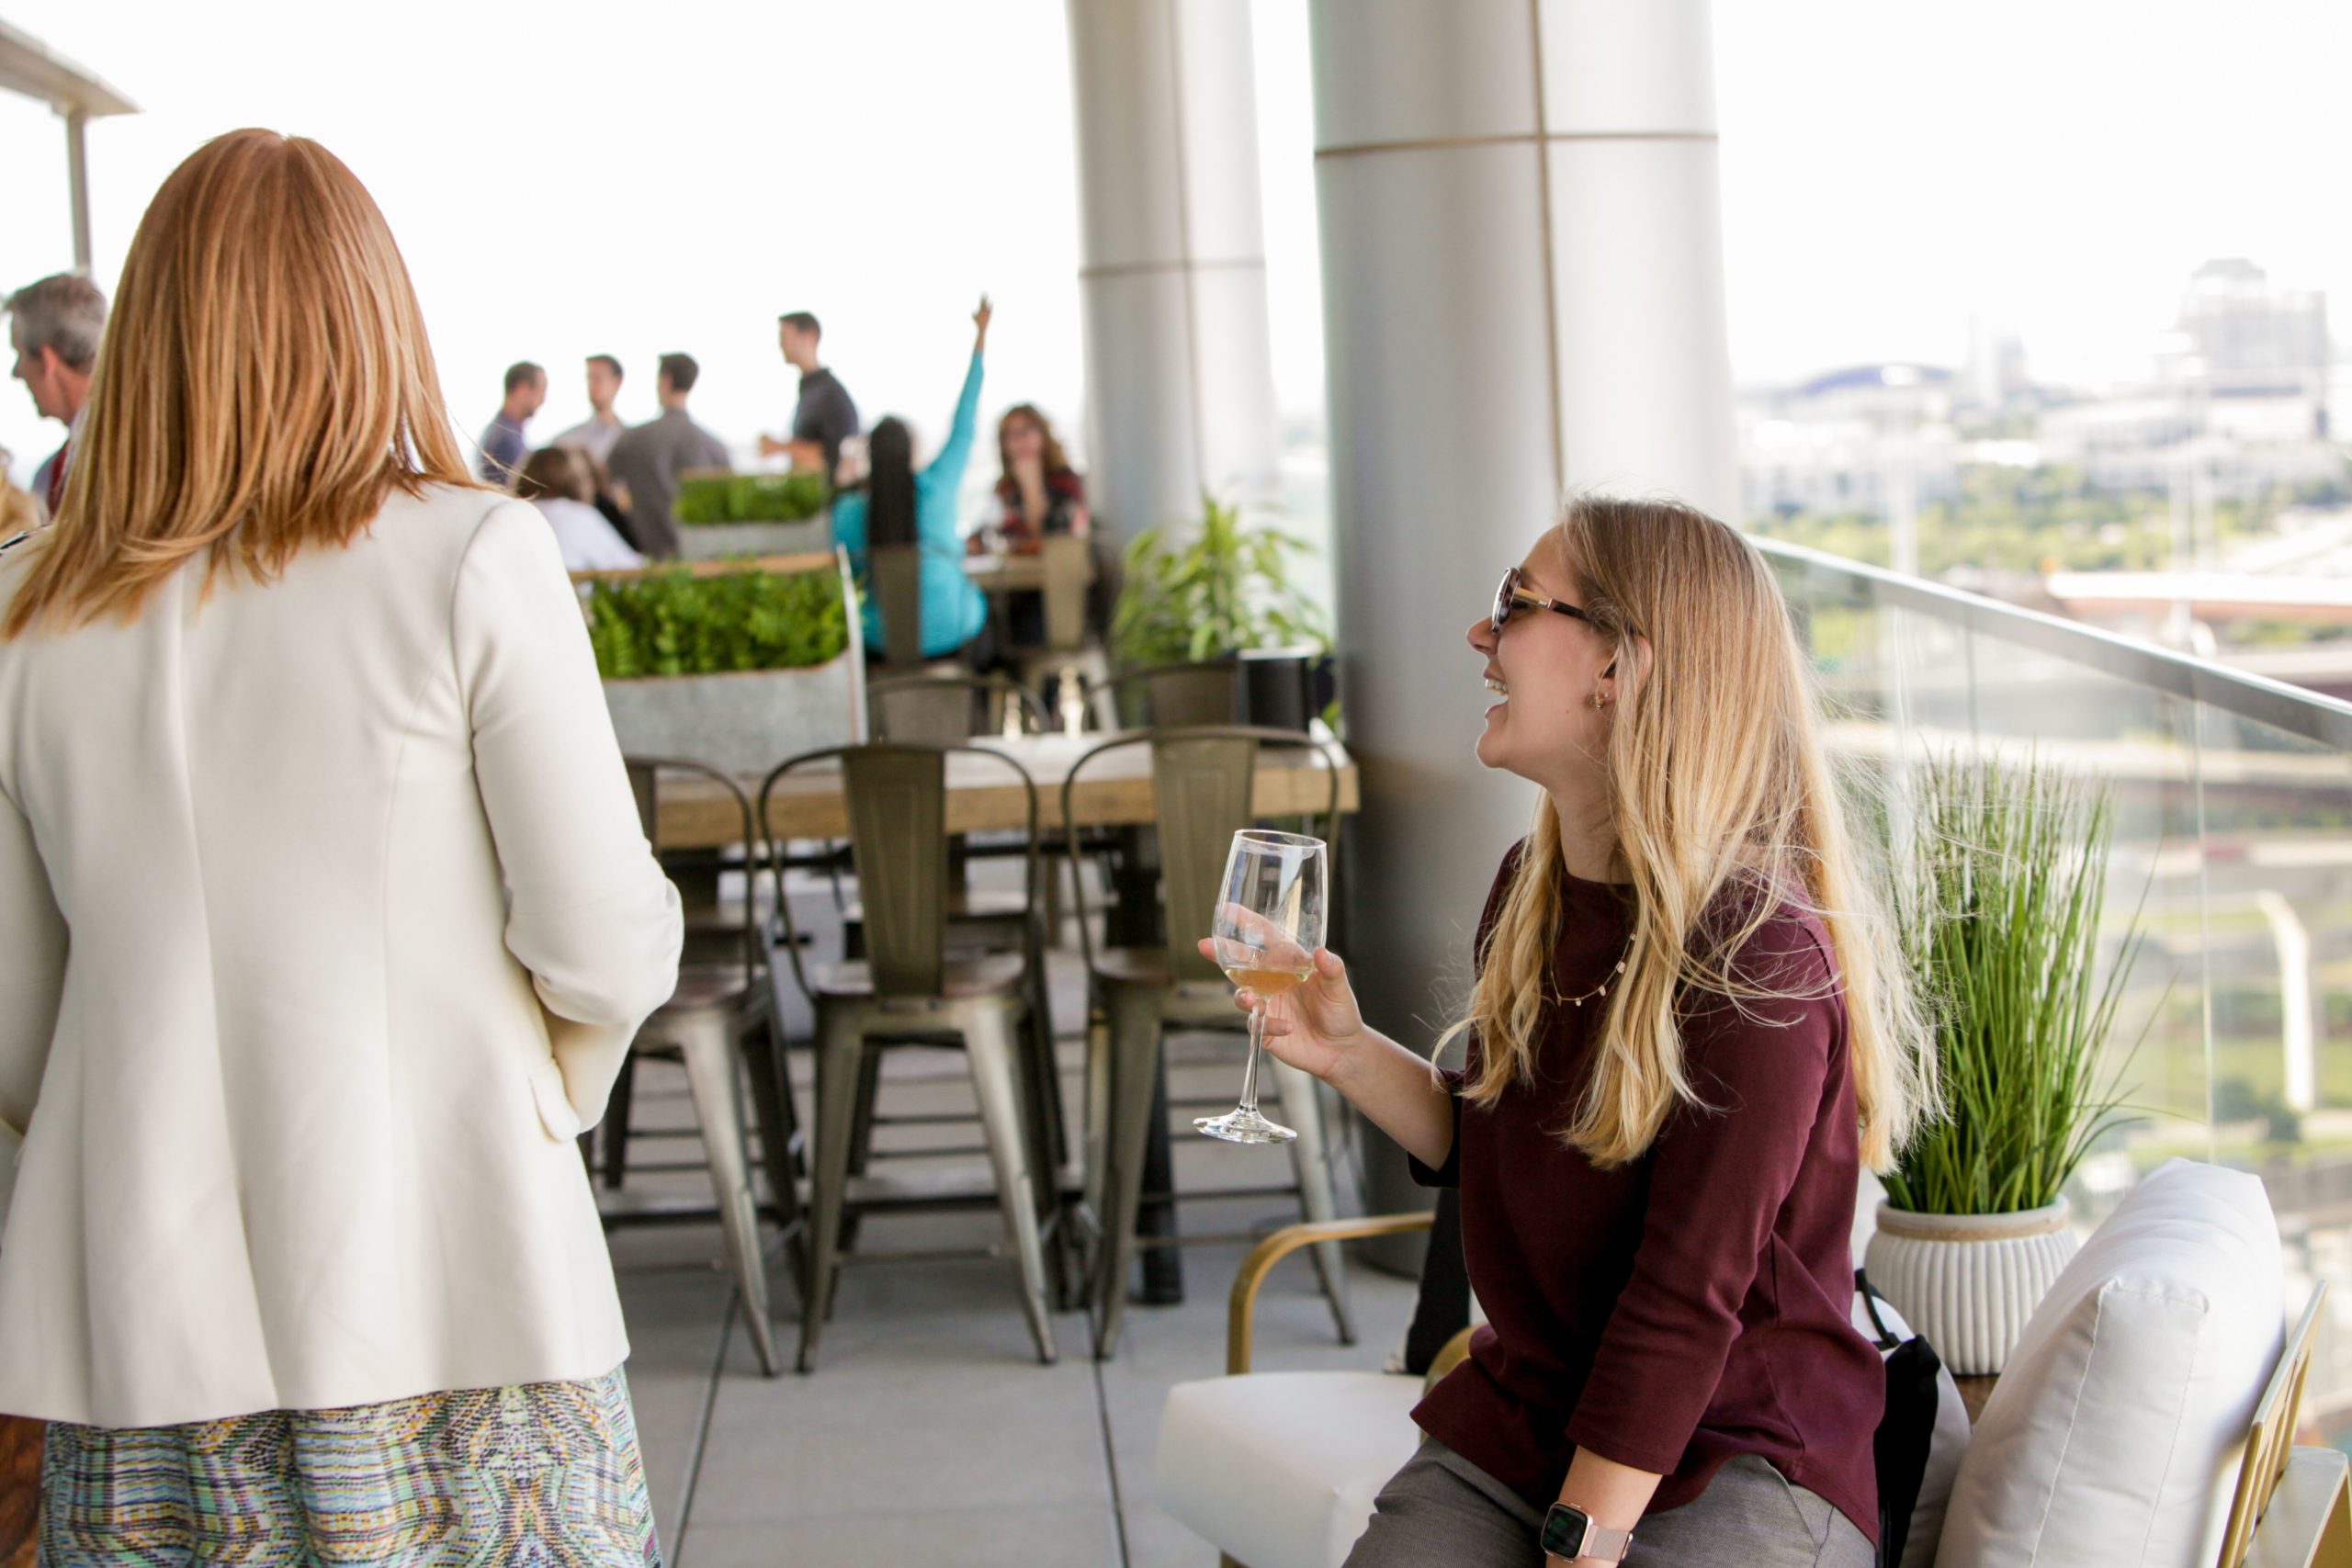 Colleagues and clients enjoy drinks on the Lifeblue balcony during the official grand opening for the new office.